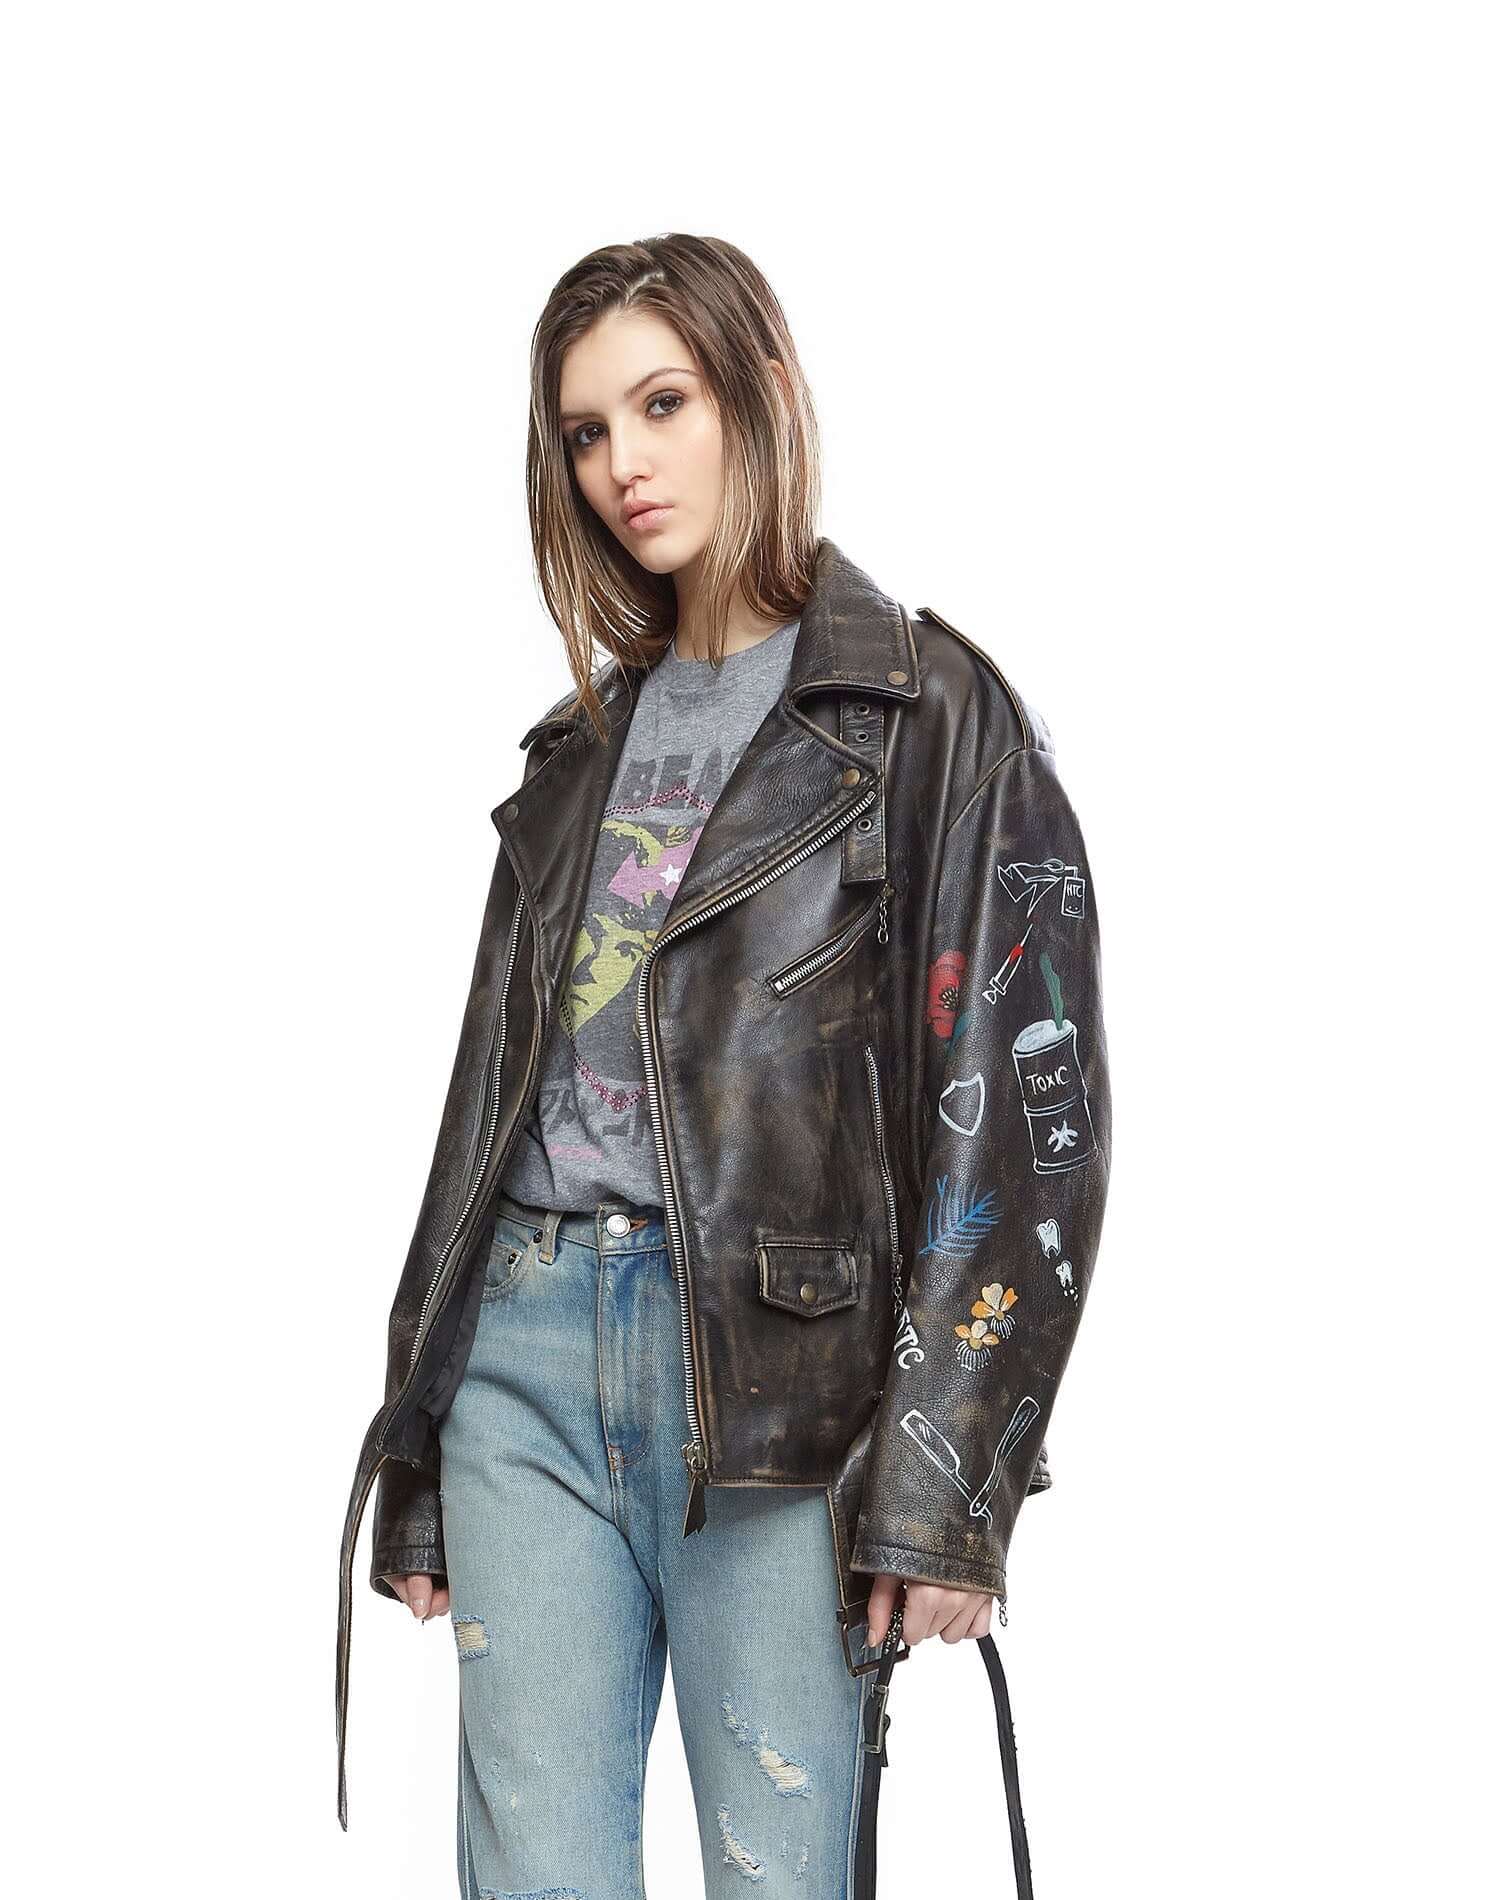 JIMI HANDPAINTED JACKET Leather jacket with handpainted details on the sleeve. Fit: over. Asymmetrical zip closure. Zippers on the sleeves. 100% leather. Lining 100% viscose. Made in Italy. HTC LOS ANGELES